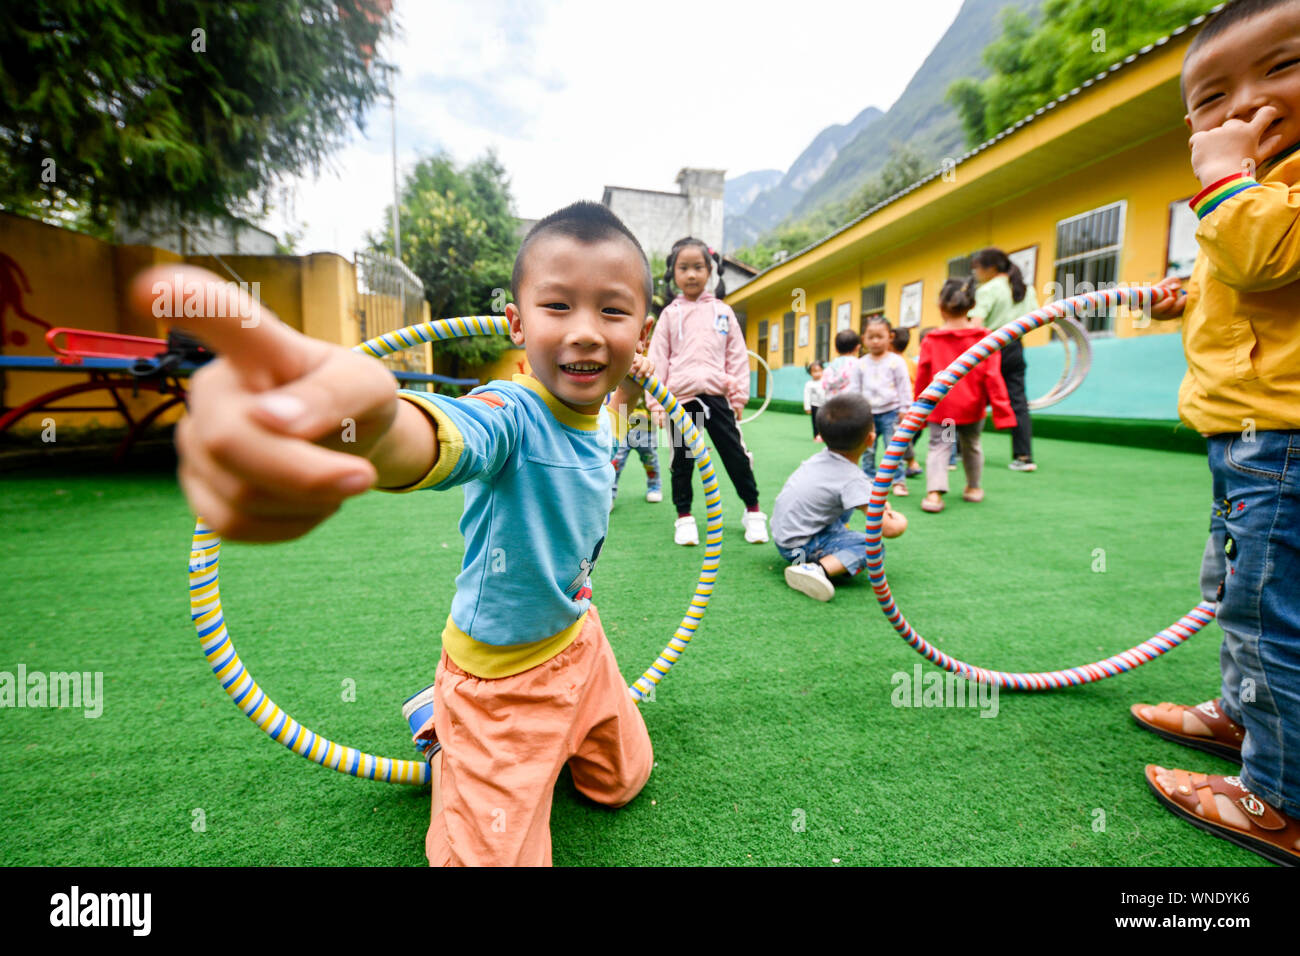 (190906) -- CHONGQING, Sept. 6, 2019 (Xinhua) -- Students enjoy a moment on the playground of Lianhua Primary School at Luzi Village, Chengkou County, southwest China's Chongqing Municipality, Sept. 3, 2019. Mu Yi, a 25-year-old PE teacher from Chongqing Municipality, offers a week-long volunteer teaching service and works with a local teacher Tao Yao in this remote village. In the school where only two second-grade students and 18 preschool children study, Mu Yi and Tao Yao also do other jobs as principals, cleaners, cooks and repairwomen. Mu Yi teaches children sports, art and music and tell Stock Photo